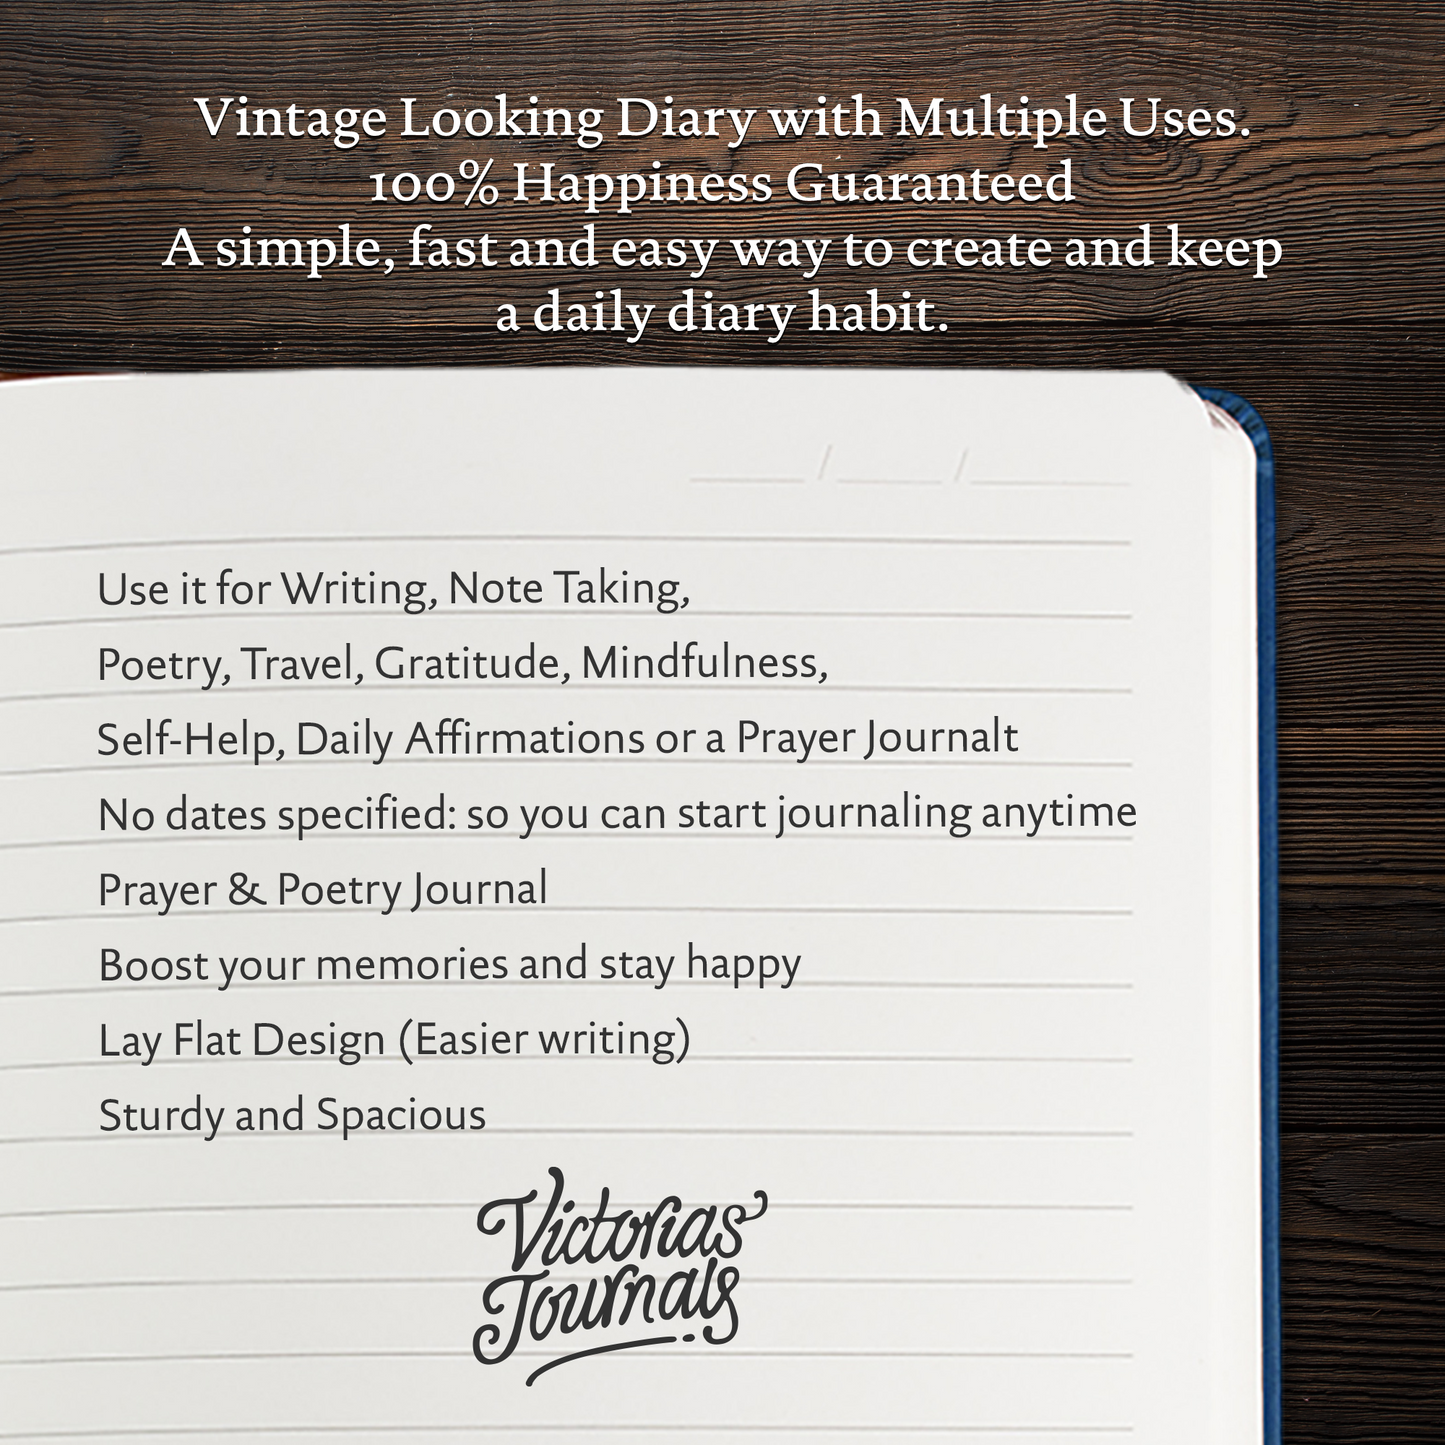 Victoria's Journals Vintage Style Diary for Men and Women – Use it for Writing, Note Taking, Poetry, Travel, Gratitude, Mindfulness, Self-Help, Daily Affirmations or a Prayer Journal 320p. (Pink)